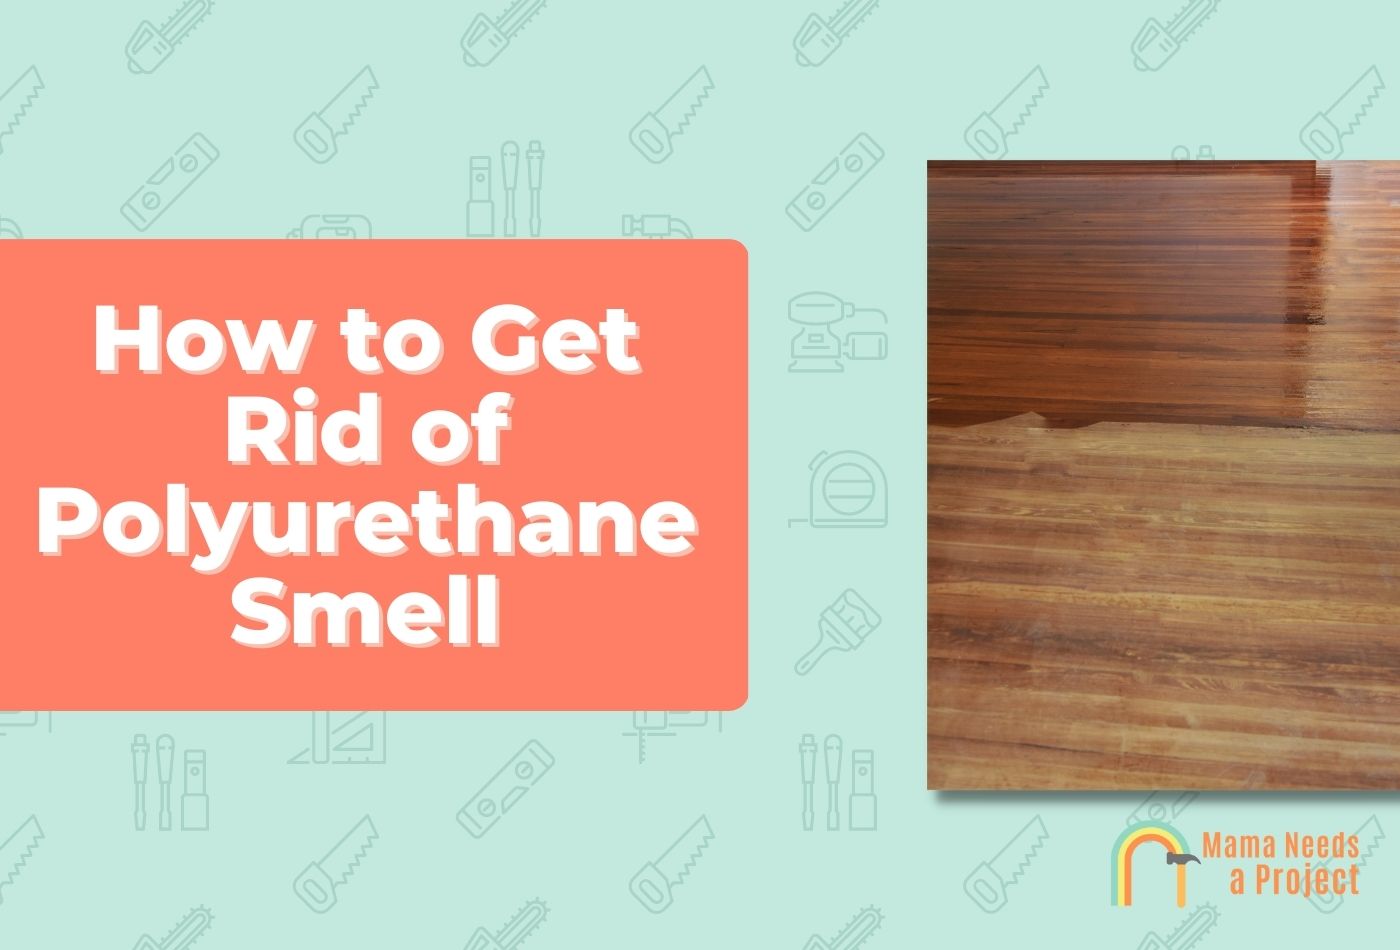 How to Get Rid of Polyurethane Smell